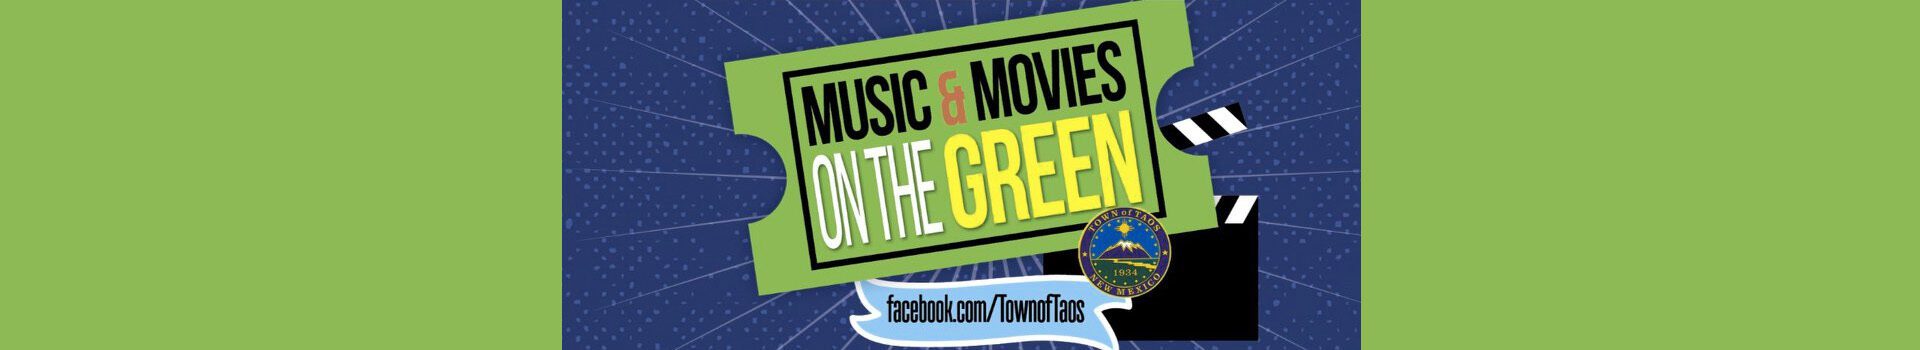 Taos Movies on the Green graphic